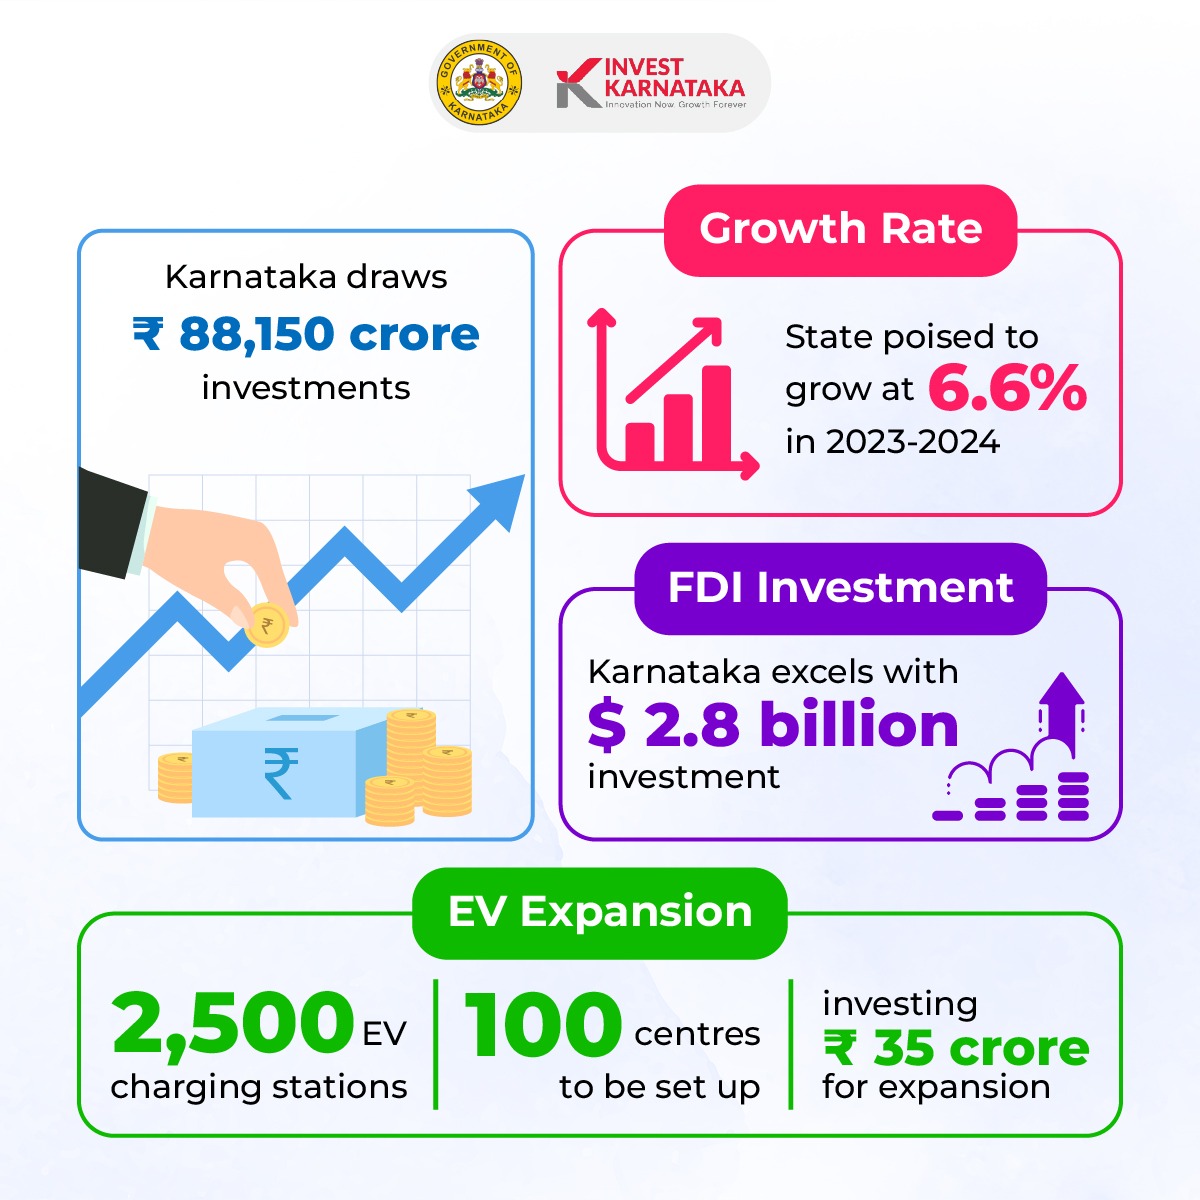 Karnataka's 15th state budget announcement paves the way for economic prosperity! With a projected growth of 6.6% in 2023-24, Karnataka is solidifying its position as a powerhouse in India's economic narrative. With ₹ 88,150 crore in investments, strong FDI, and initiatives